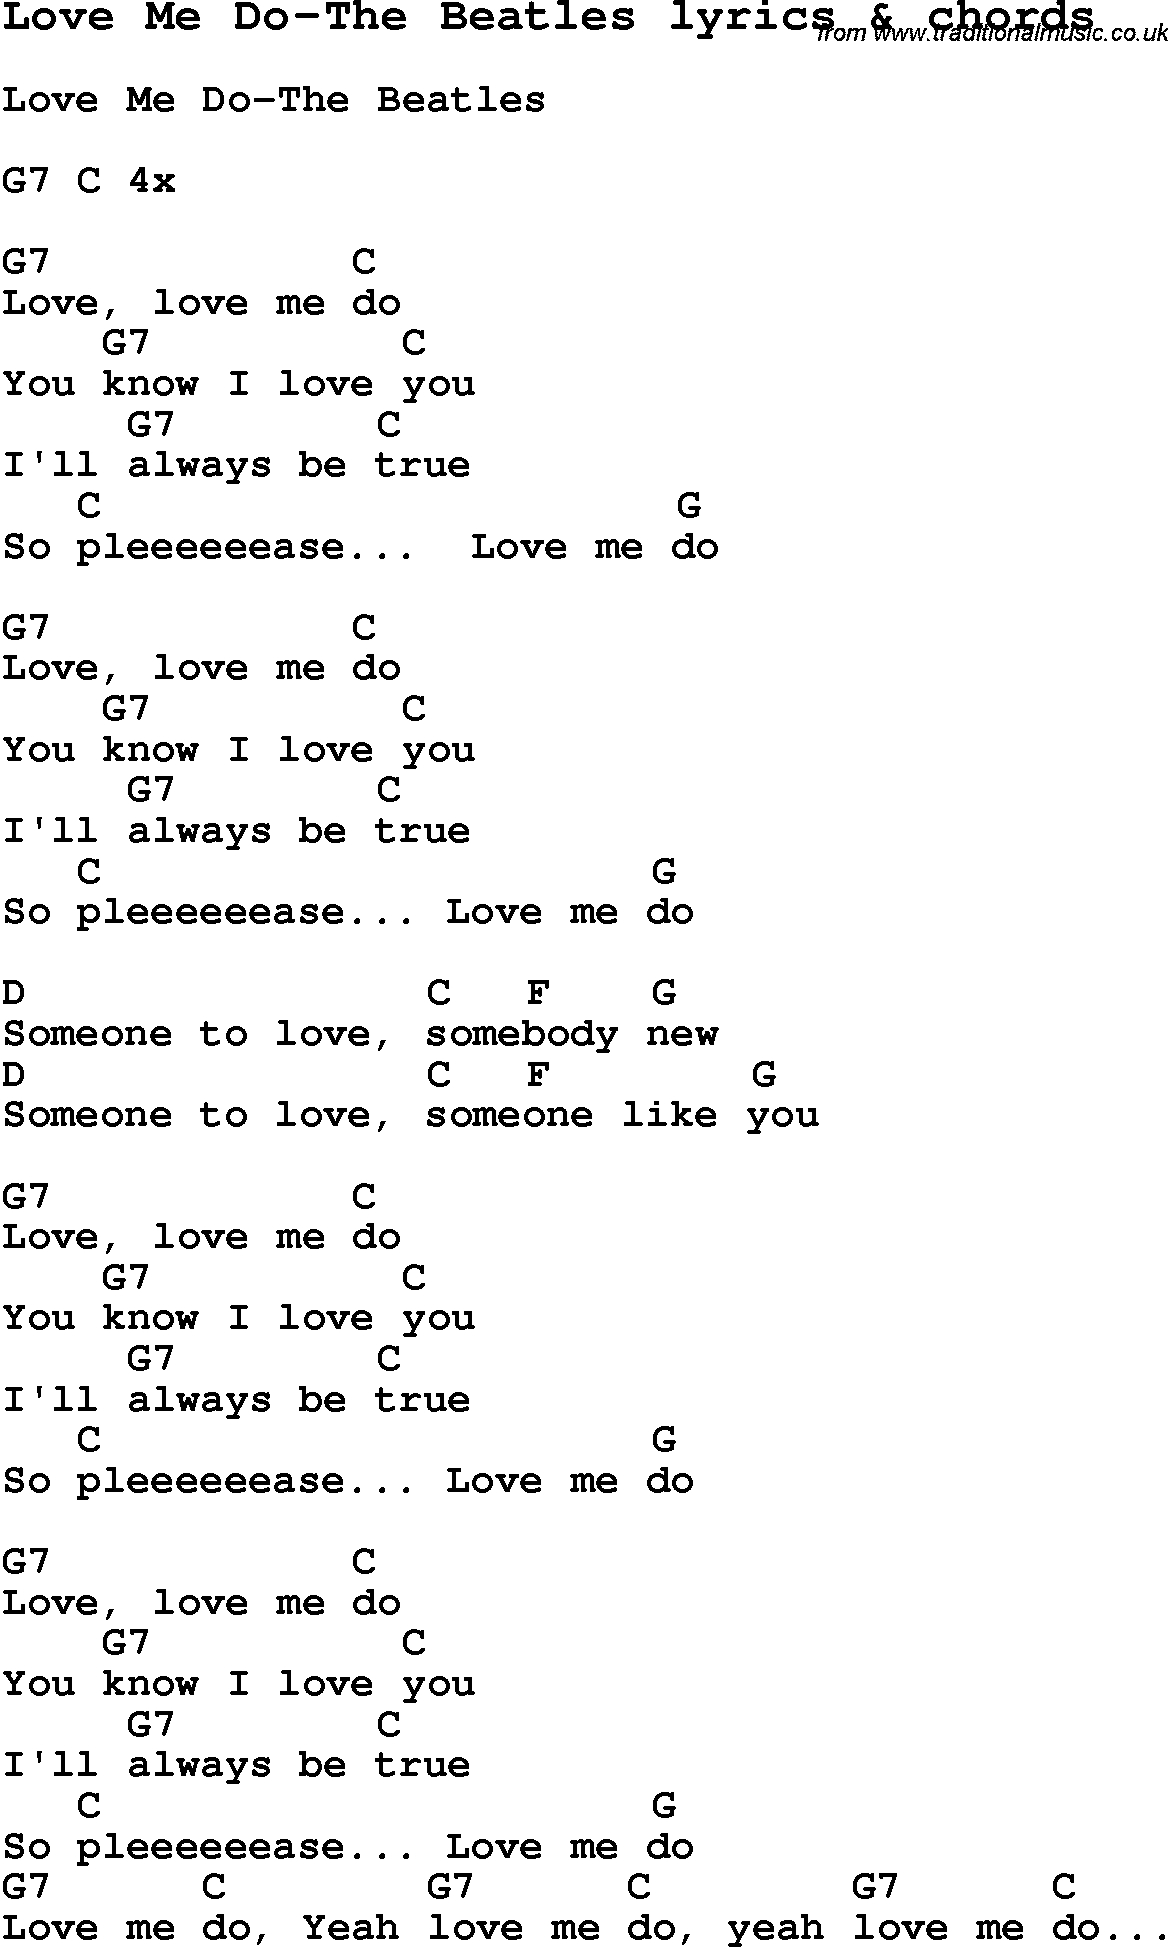 Love Me Like You Do Chords Love Song Lyrics Forlove Me Do The Beatles With Chords